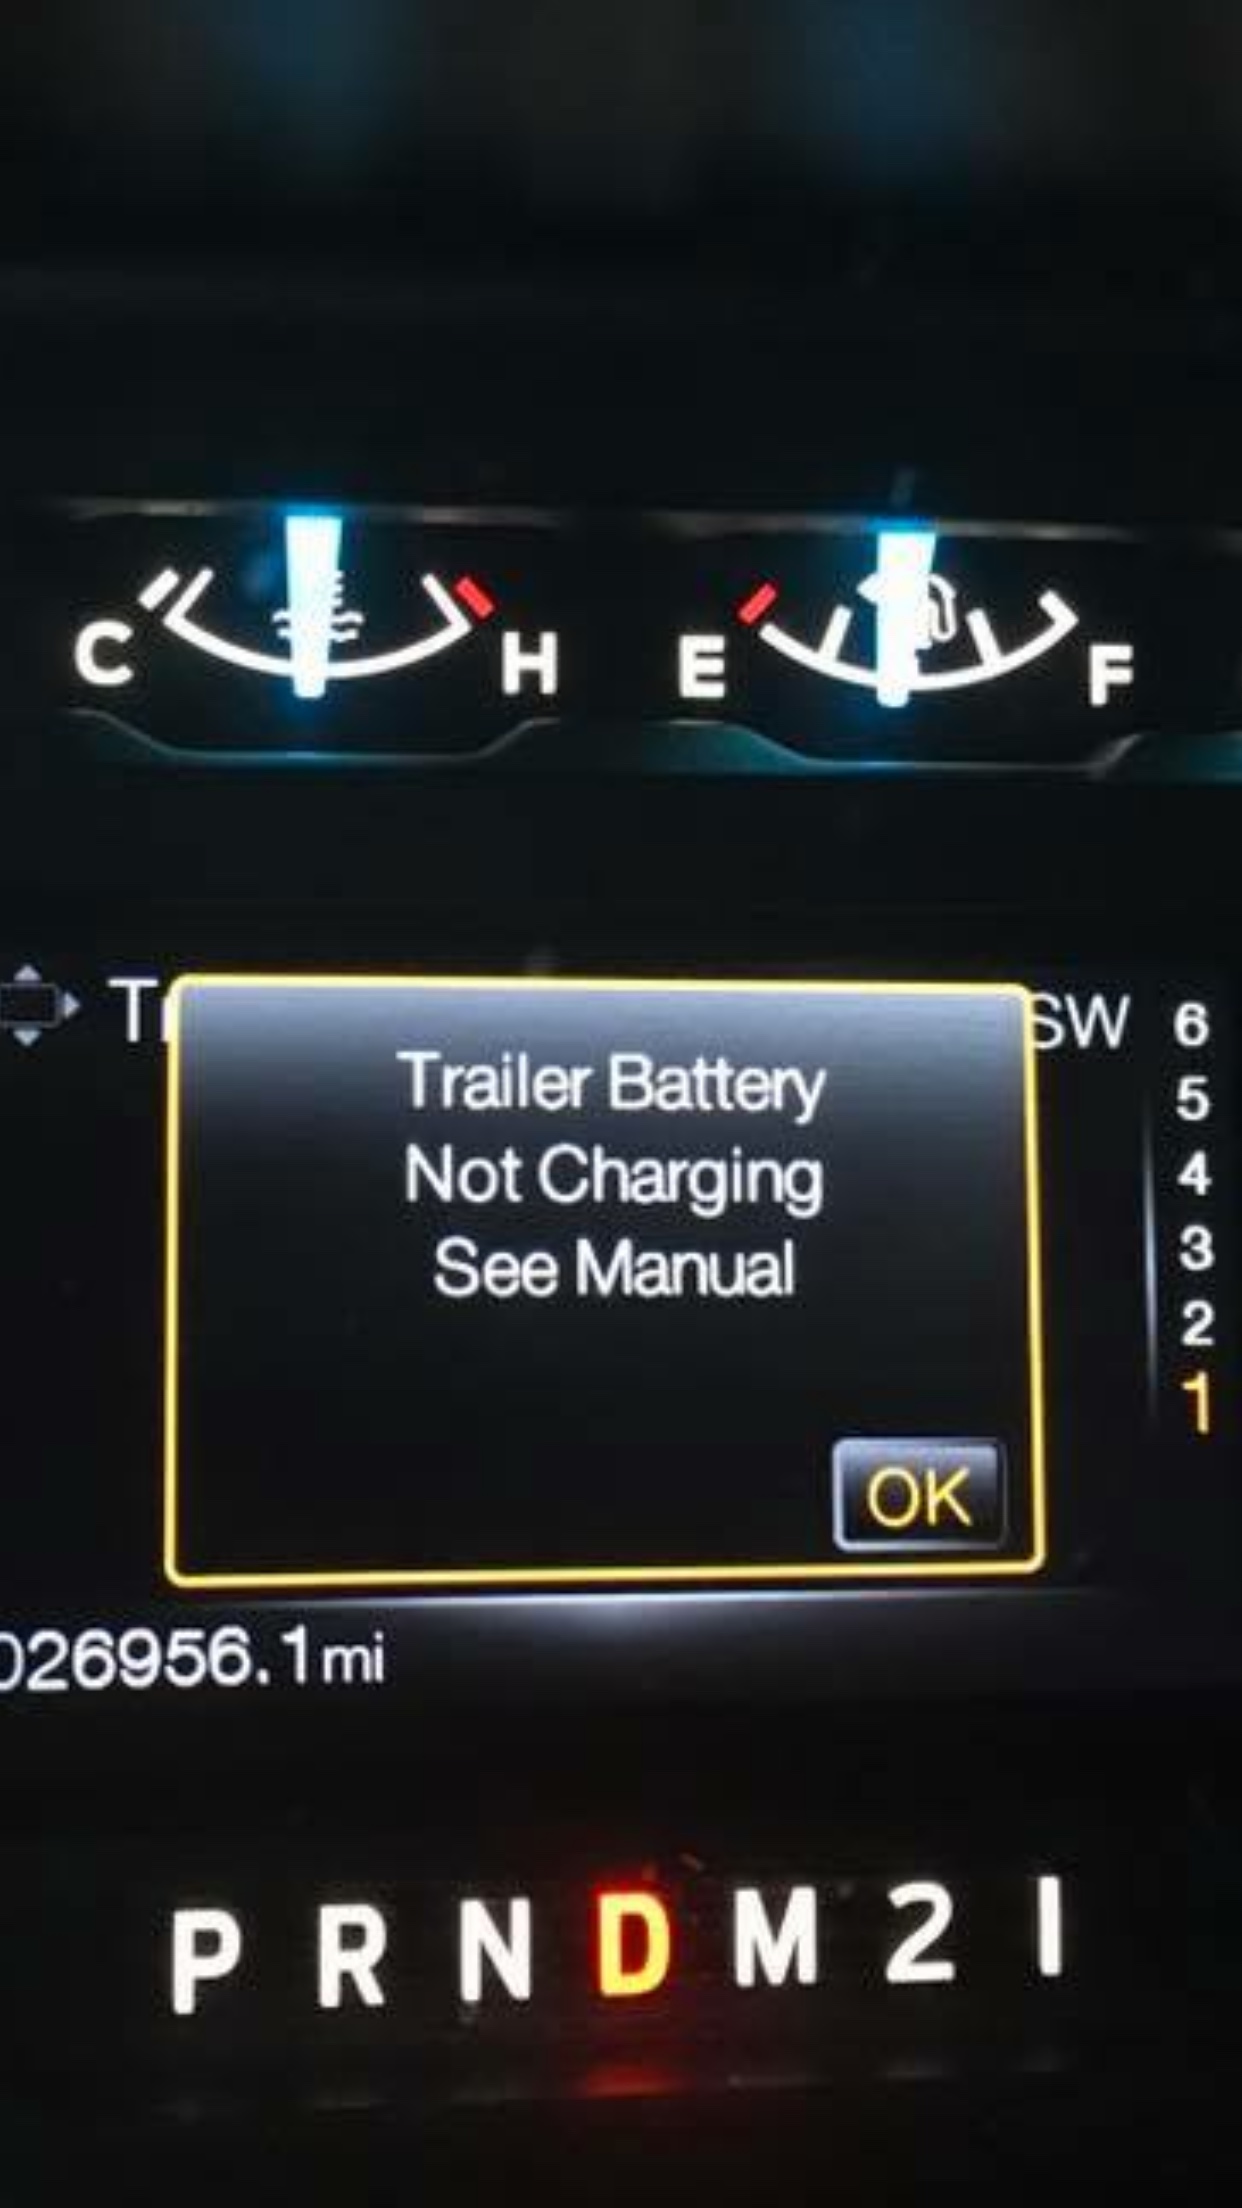 Trailer Battery not charging - Ford Truck Enthusiasts Forums 2015 Ford F150 Trailer Battery Not Charging Message